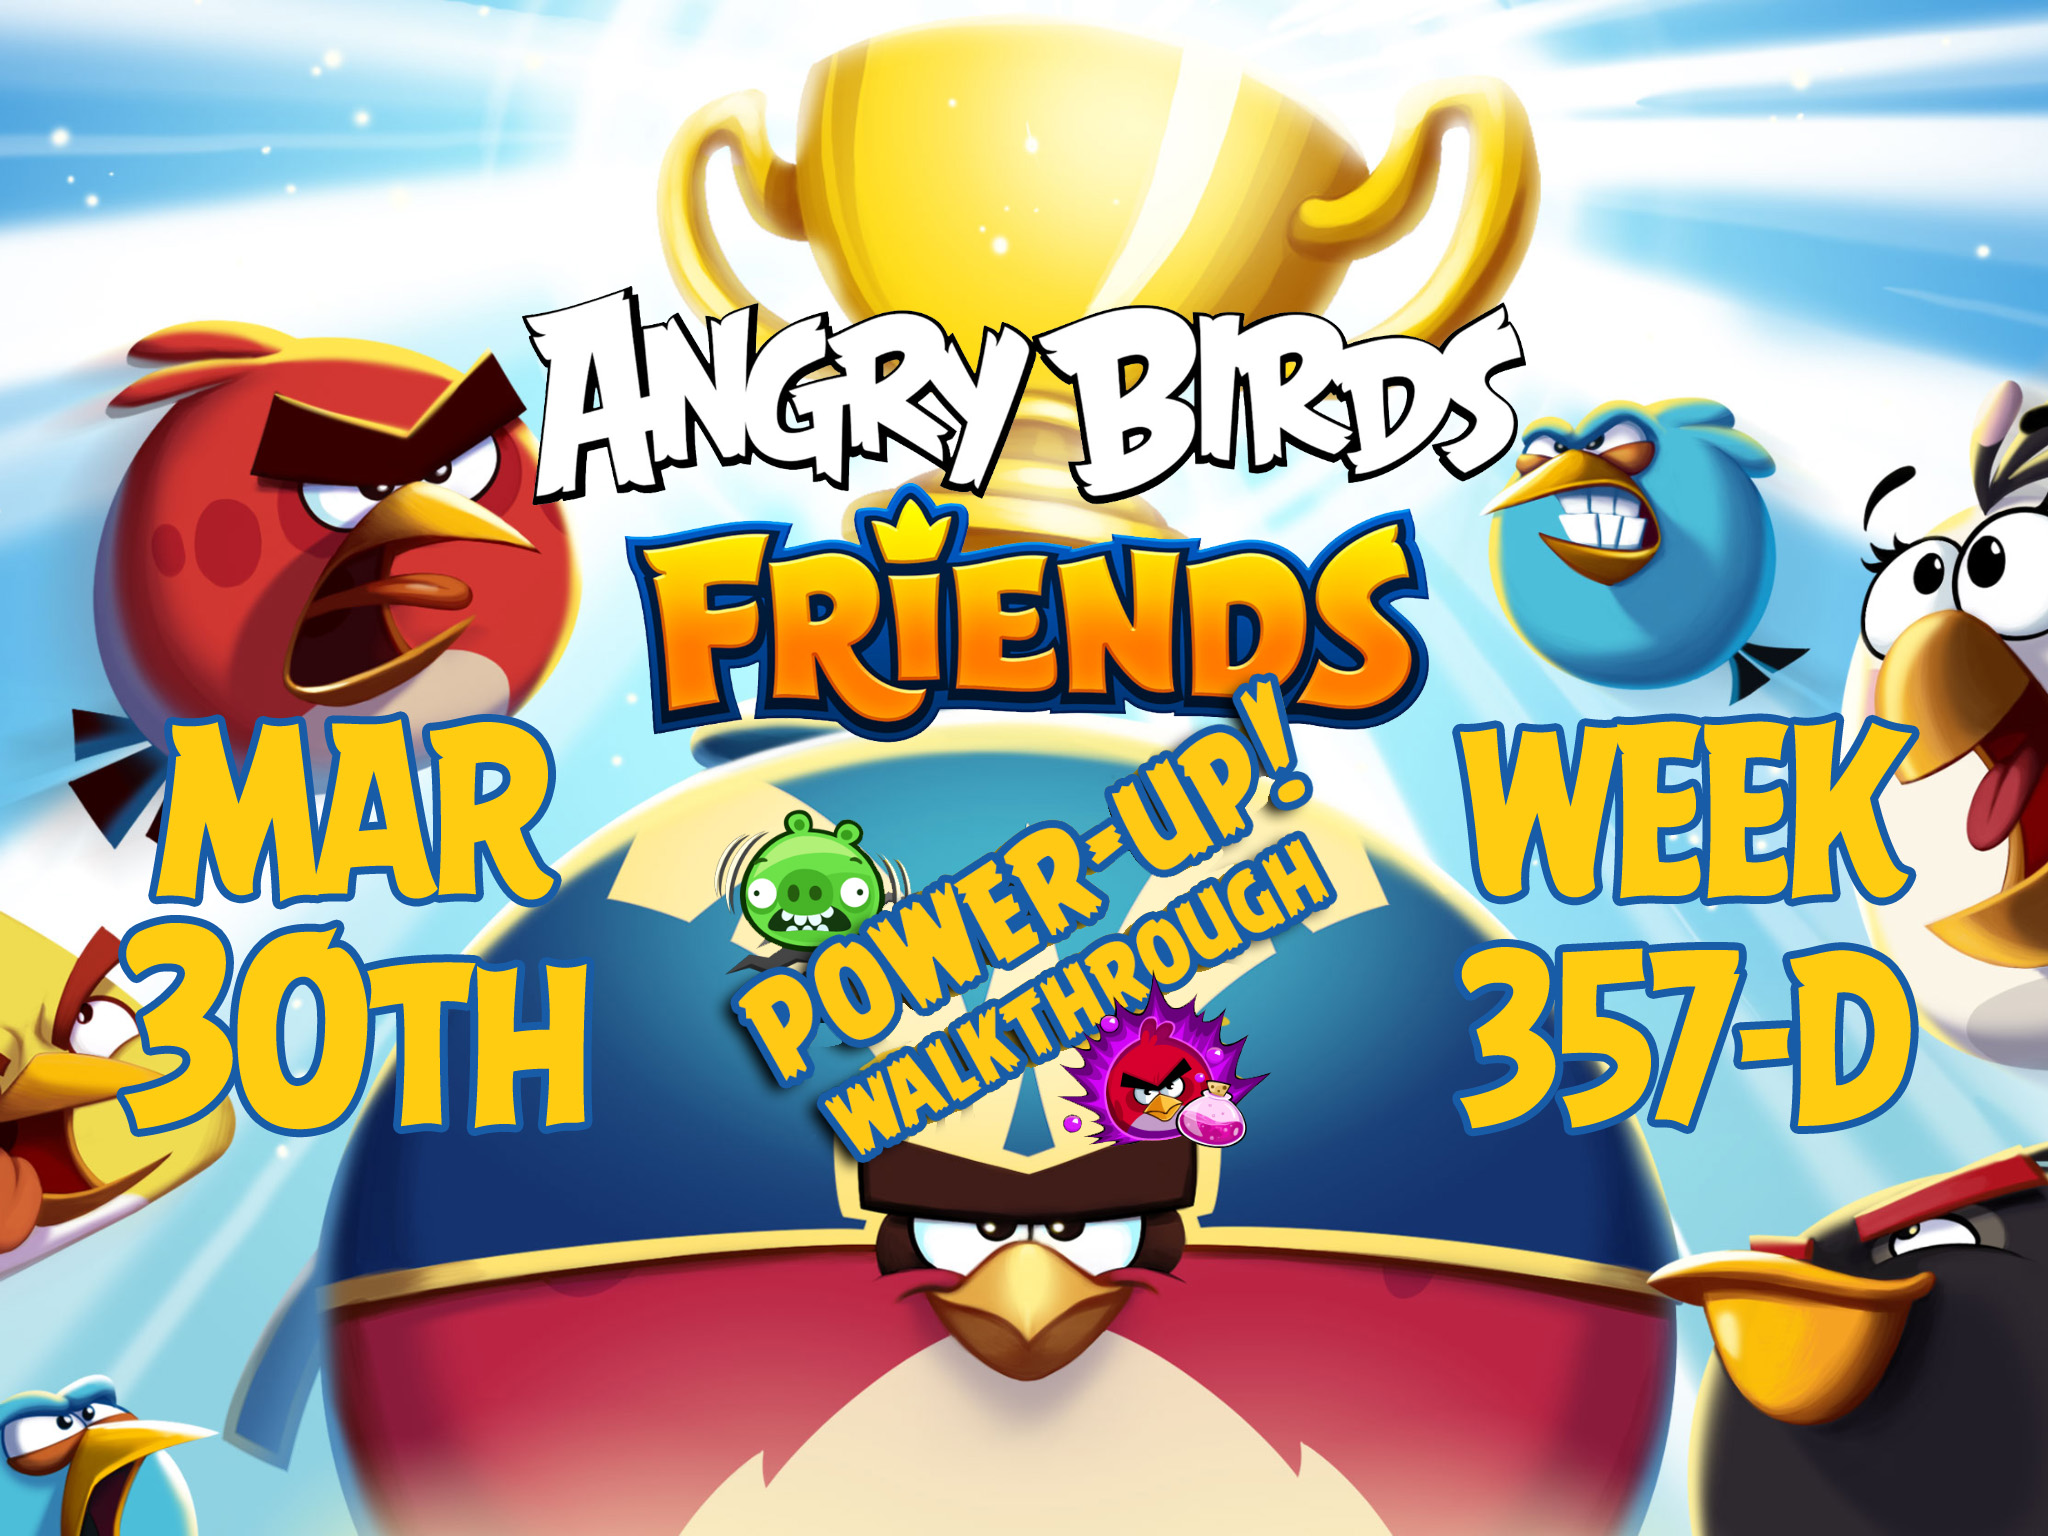 Angry-Birds-Friends-Tournament-Week-357-D-Feature-Image-PU